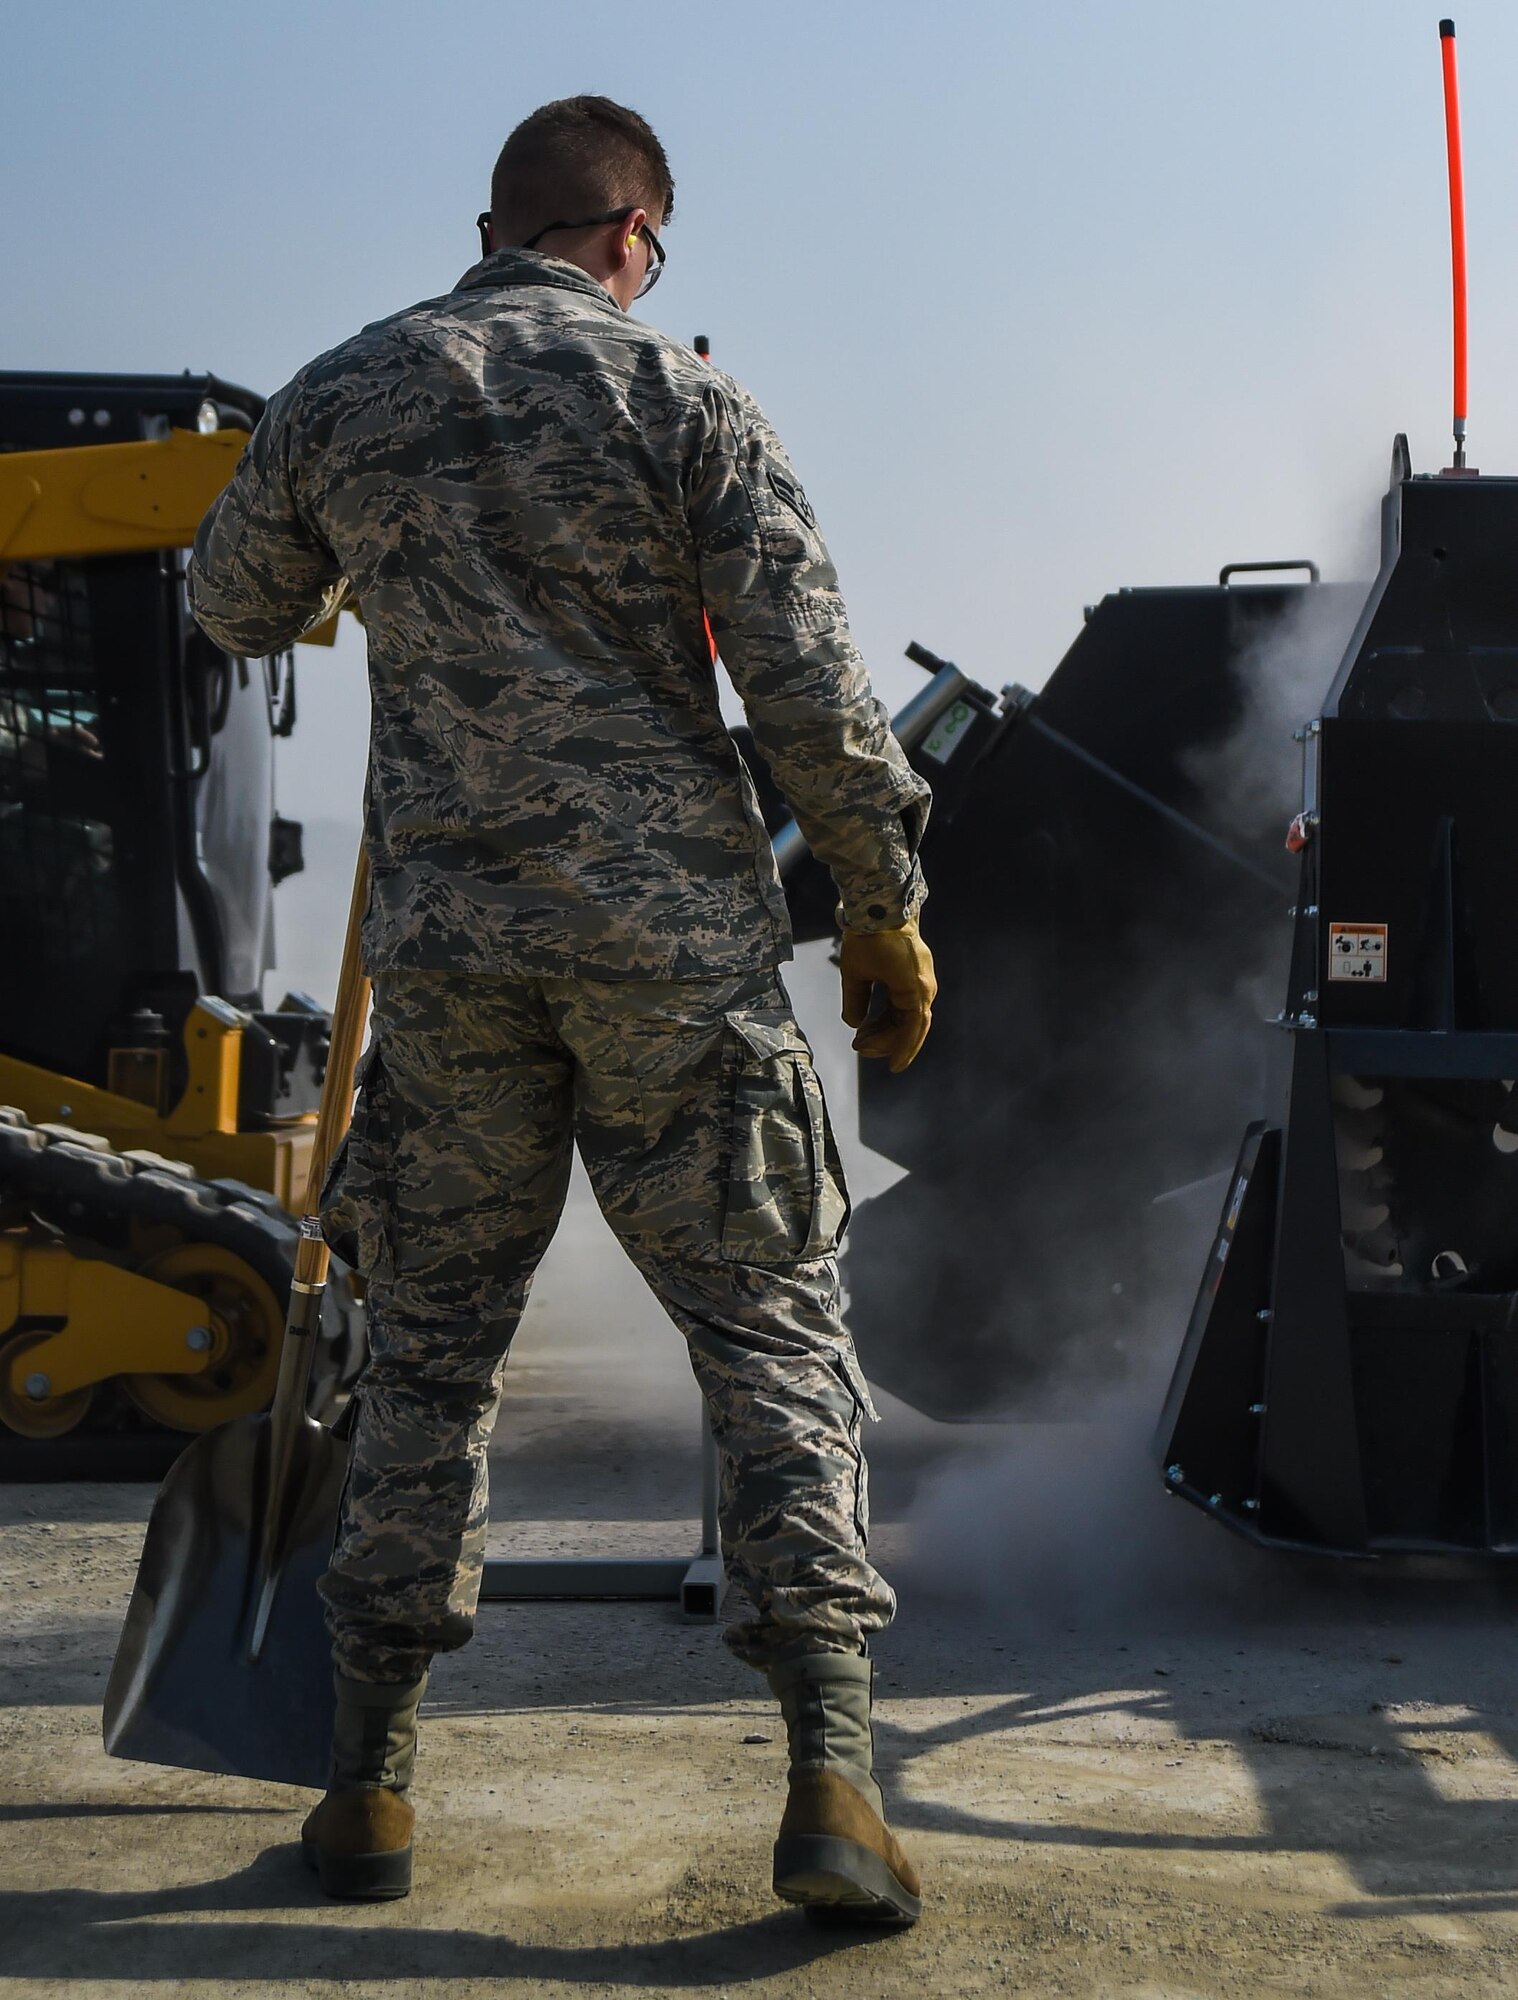 U.S. Air Force Airman 1st Class Alec Cates, 773d Civil Engineer Squadron, participates in a Rapid Airfield Damage Repair bilateral training exercise at Gwangju Air Base, Republic of Korea, Nov. 8, 2017. Approximately forty U.S. Airmen from the 773d CES at Joint Base Elmendorf-Richardson, Alaska, and 40 R.O.K. Airmen worked shoulder-to-shoulder to learn the new RADR process, enhance interoperability, prepare for wartime contingencies and strengthen partnerships in the Indo-Asia Pacific region. (U.S. Air Force photo by Senior Airman Curt Beach)